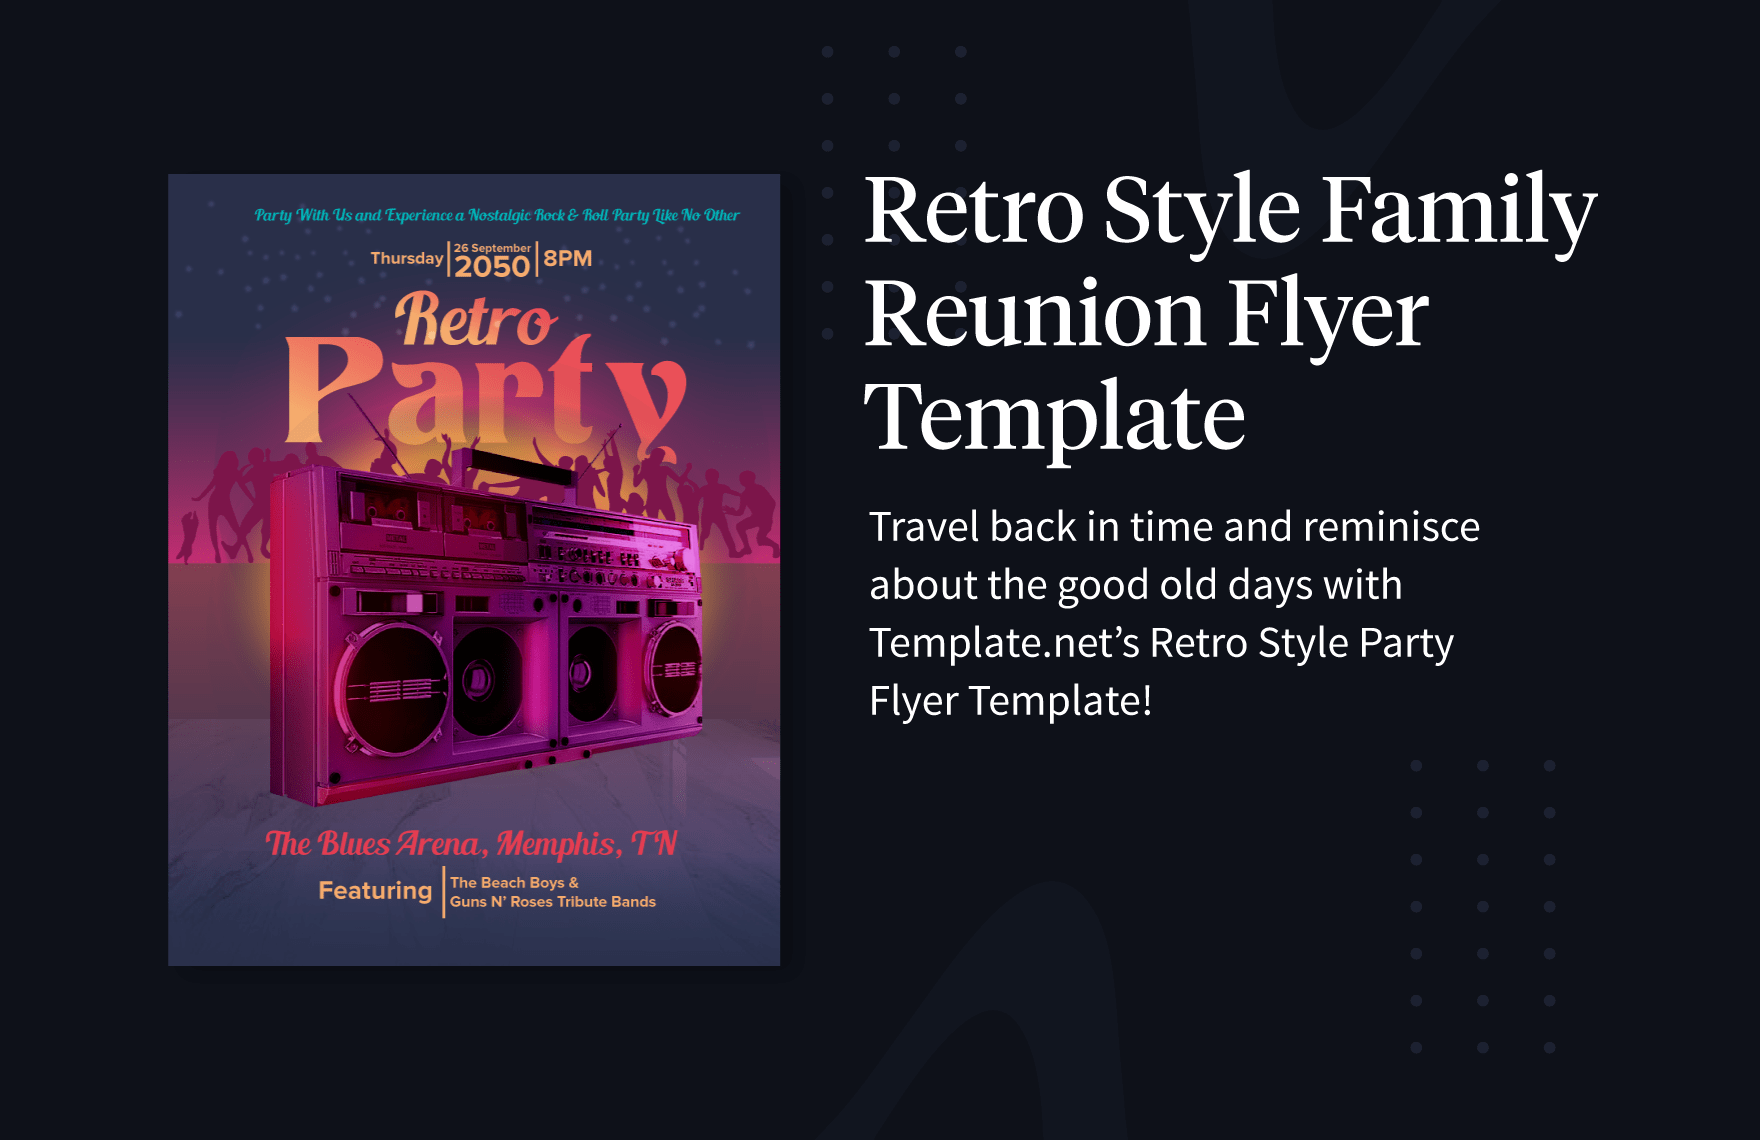 Retro Style Family Reunion Flyer Template